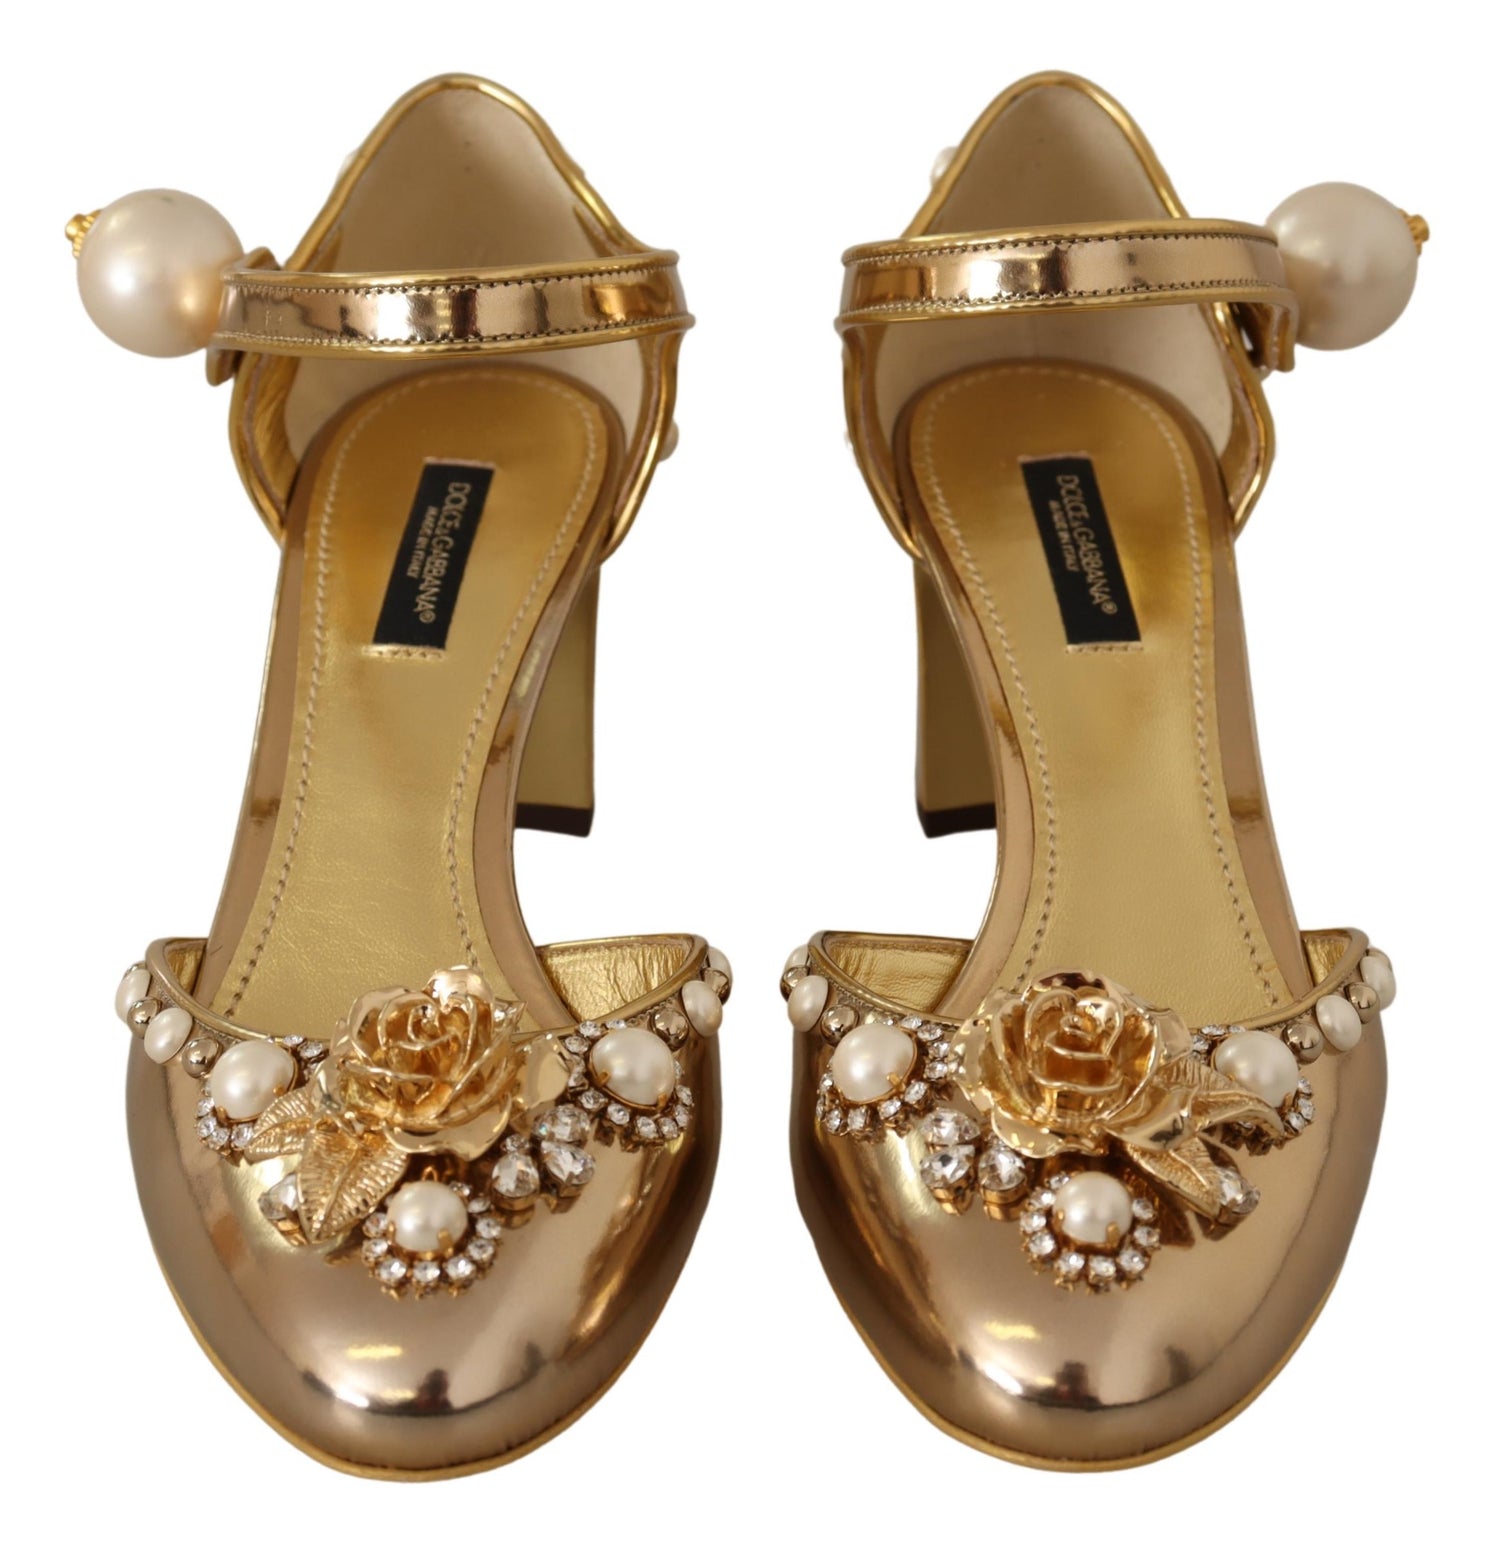 D&G Dolce Gabbana Distressed Gold Heels Shoes Made in Italy 39.5 | eBay